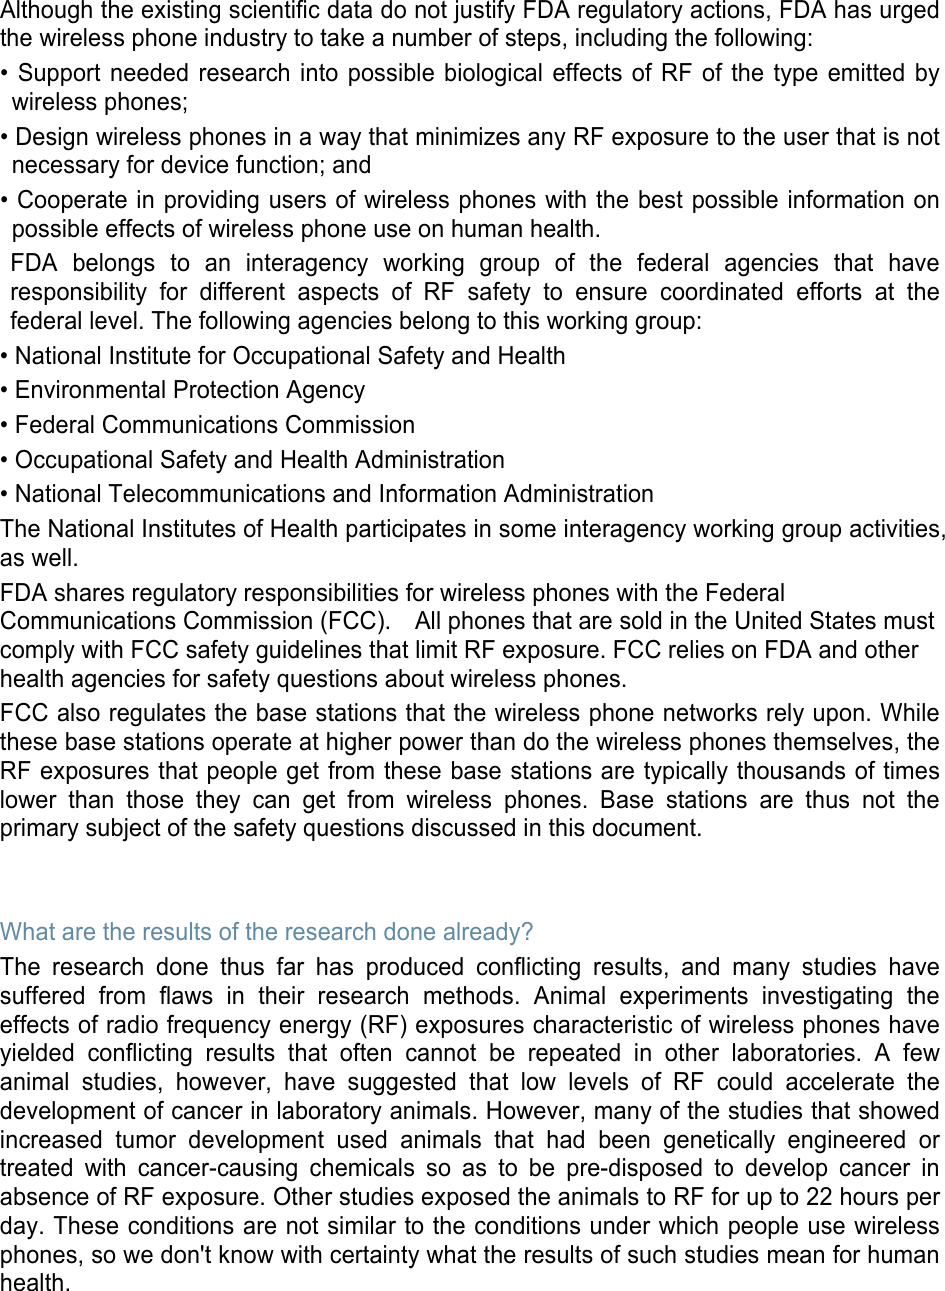 Although the existing scientific data do not justify FDA regulatory actions, FDA has urged the wireless phone industry to take a number of steps, including the following: • Support needed research into possible biological effects of RF of the type emitted by wireless phones; • Design wireless phones in a way that minimizes any RF exposure to the user that is not necessary for device function; and • Cooperate in providing users of wireless phones with the best possible information on possible effects of wireless phone use on human health. FDA belongs to an interagency working group of the federal agencies that have responsibility for different aspects of RF safety to ensure coordinated efforts at the federal level. The following agencies belong to this working group: • National Institute for Occupational Safety and Health • Environmental Protection Agency • Federal Communications Commission • Occupational Safety and Health Administration • National Telecommunications and Information Administration The National Institutes of Health participates in some interagency working group activities, as well. FDA shares regulatory responsibilities for wireless phones with the Federal Communications Commission (FCC).    All phones that are sold in the United States must comply with FCC safety guidelines that limit RF exposure. FCC relies on FDA and other health agencies for safety questions about wireless phones. FCC also regulates the base stations that the wireless phone networks rely upon. While these base stations operate at higher power than do the wireless phones themselves, the RF exposures that people get from these base stations are typically thousands of times lower than those they can get from wireless phones. Base stations are thus not the primary subject of the safety questions discussed in this document.   What are the results of the research done already? The research done thus far has produced conflicting results, and many studies have suffered from flaws in their research methods. Animal experiments investigating the effects of radio frequency energy (RF) exposures characteristic of wireless phones have yielded conflicting results that often cannot be repeated in other laboratories. A few animal studies, however, have suggested that low levels of RF could accelerate the development of cancer in laboratory animals. However, many of the studies that showed increased tumor development used animals that had been genetically engineered or treated with cancer-causing chemicals so as to be pre-disposed to develop cancer in absence of RF exposure. Other studies exposed the animals to RF for up to 22 hours per day. These conditions are not similar to the conditions under which people use wireless phones, so we don&apos;t know with certainty what the results of such studies mean for human health.    